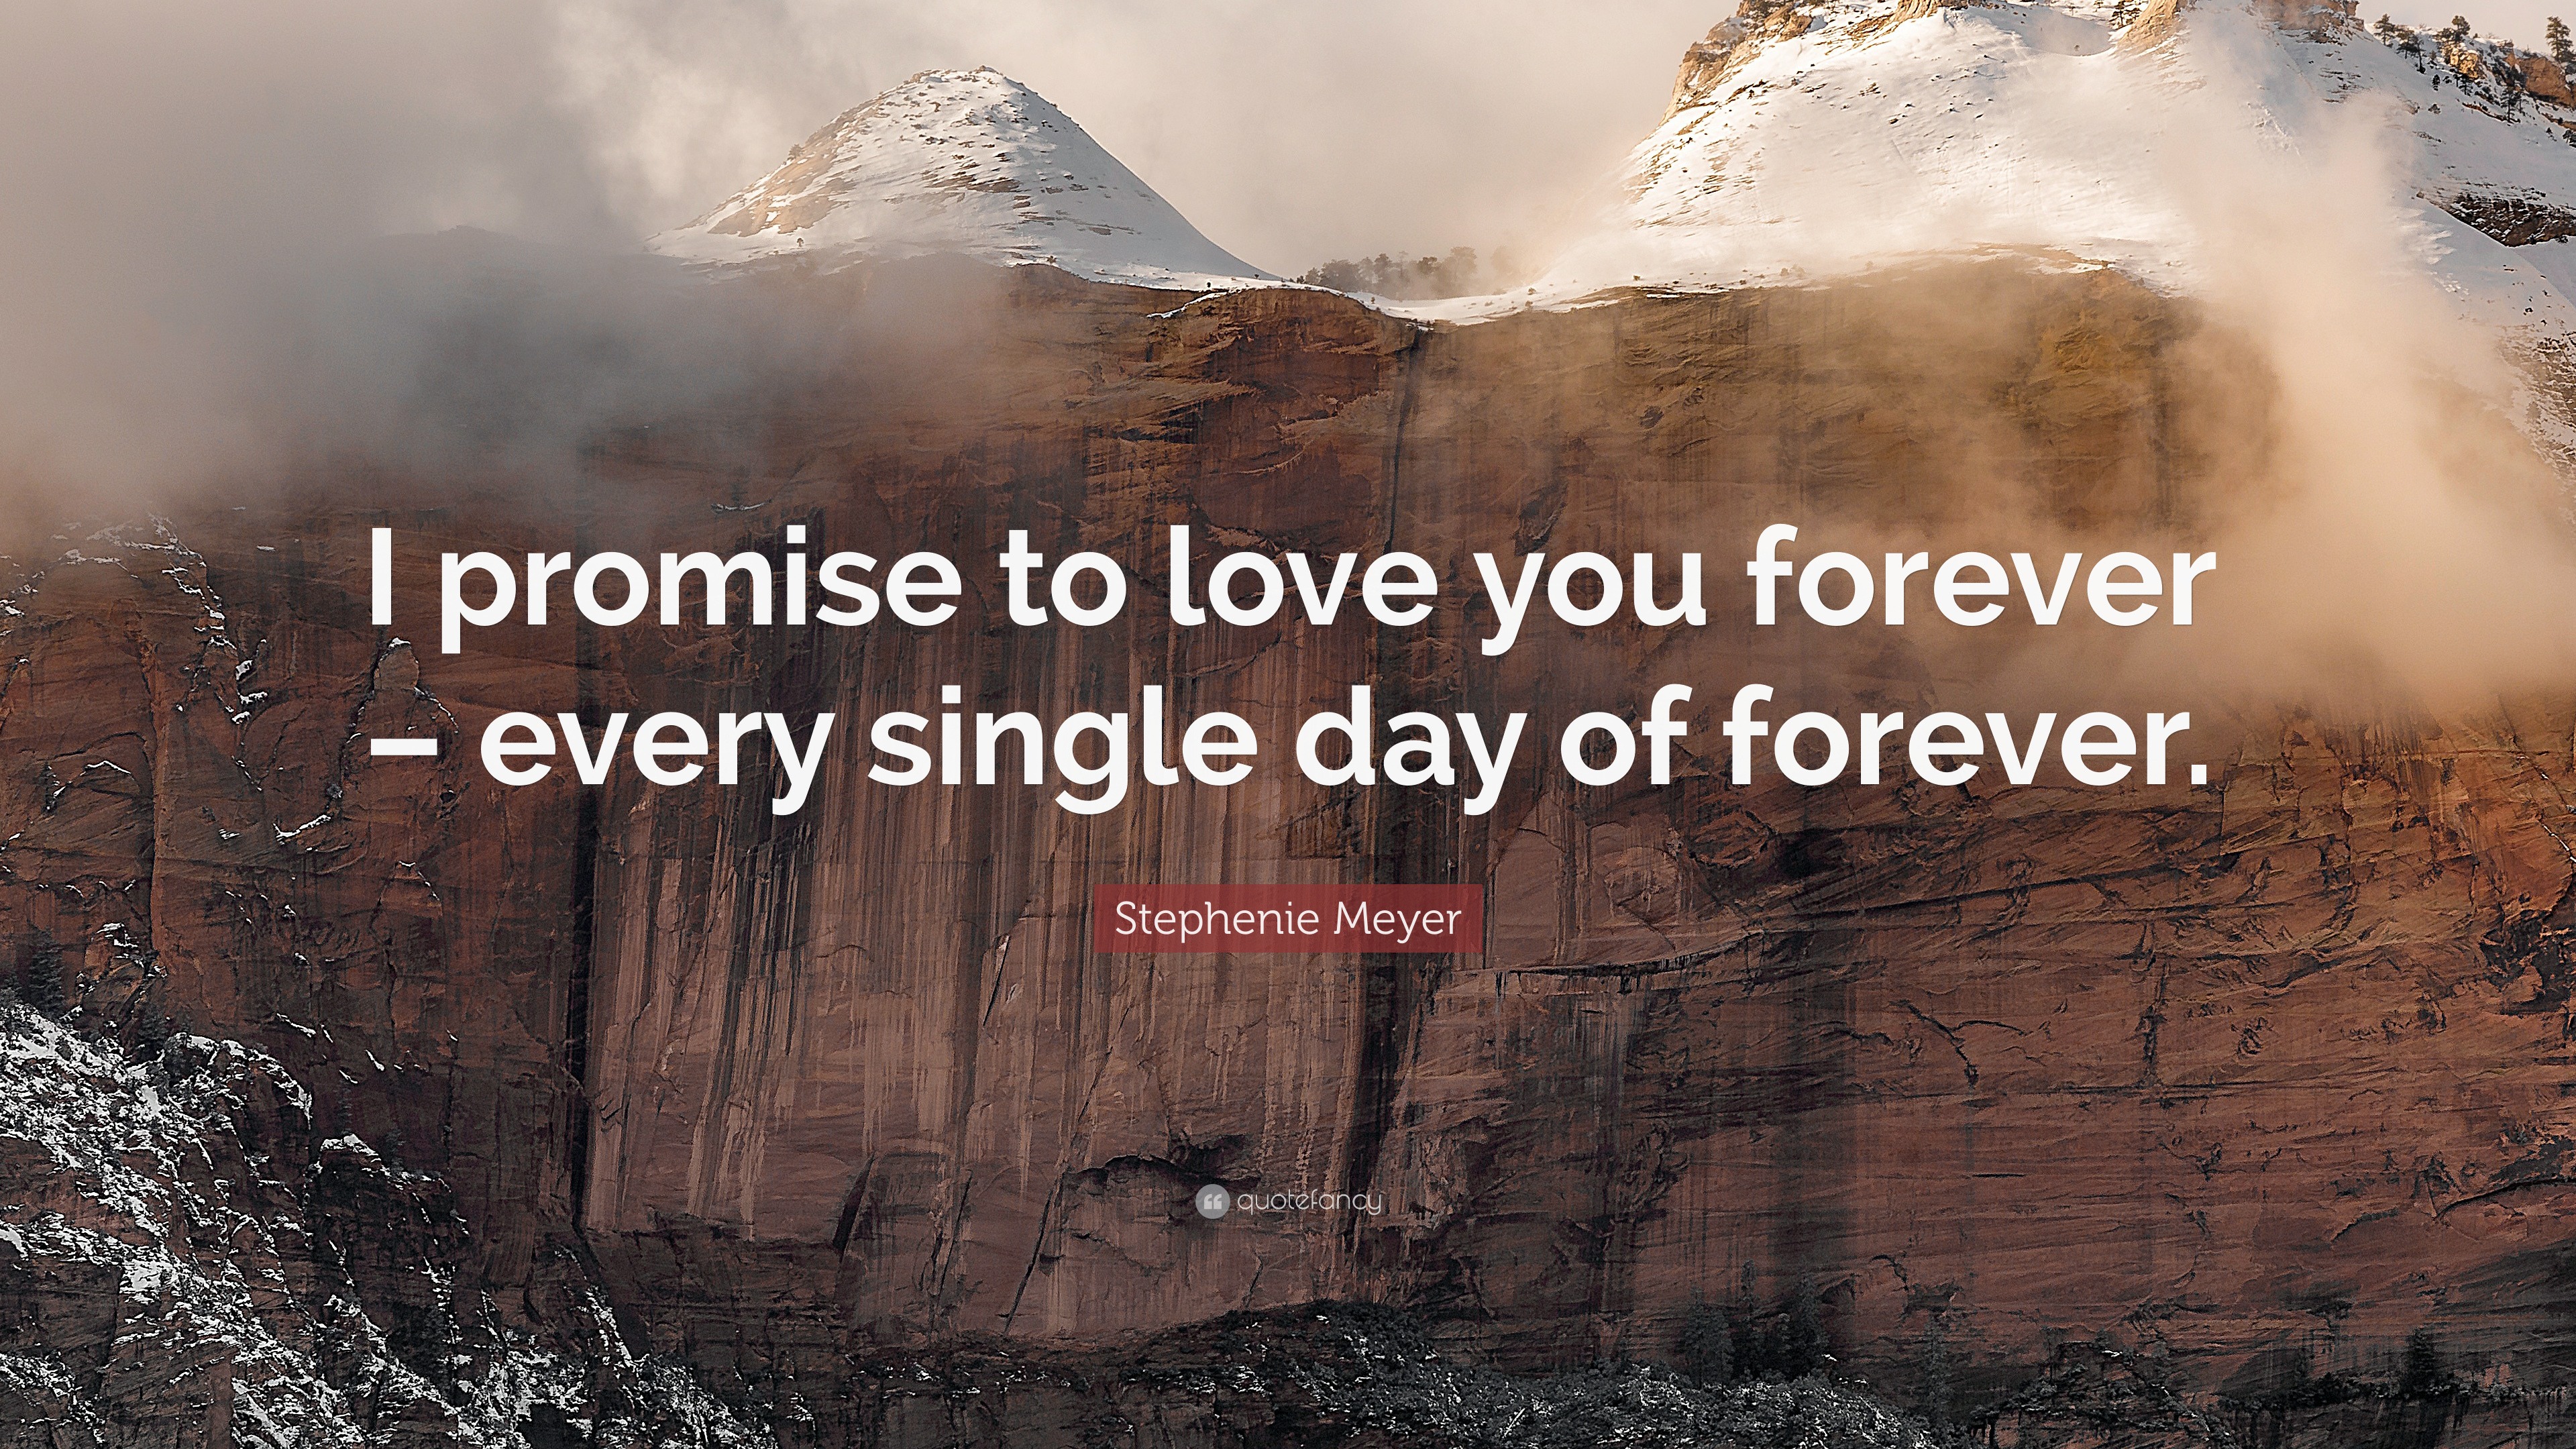 Stephenie Meyer Quote: "I promise to love you forever - every single ...